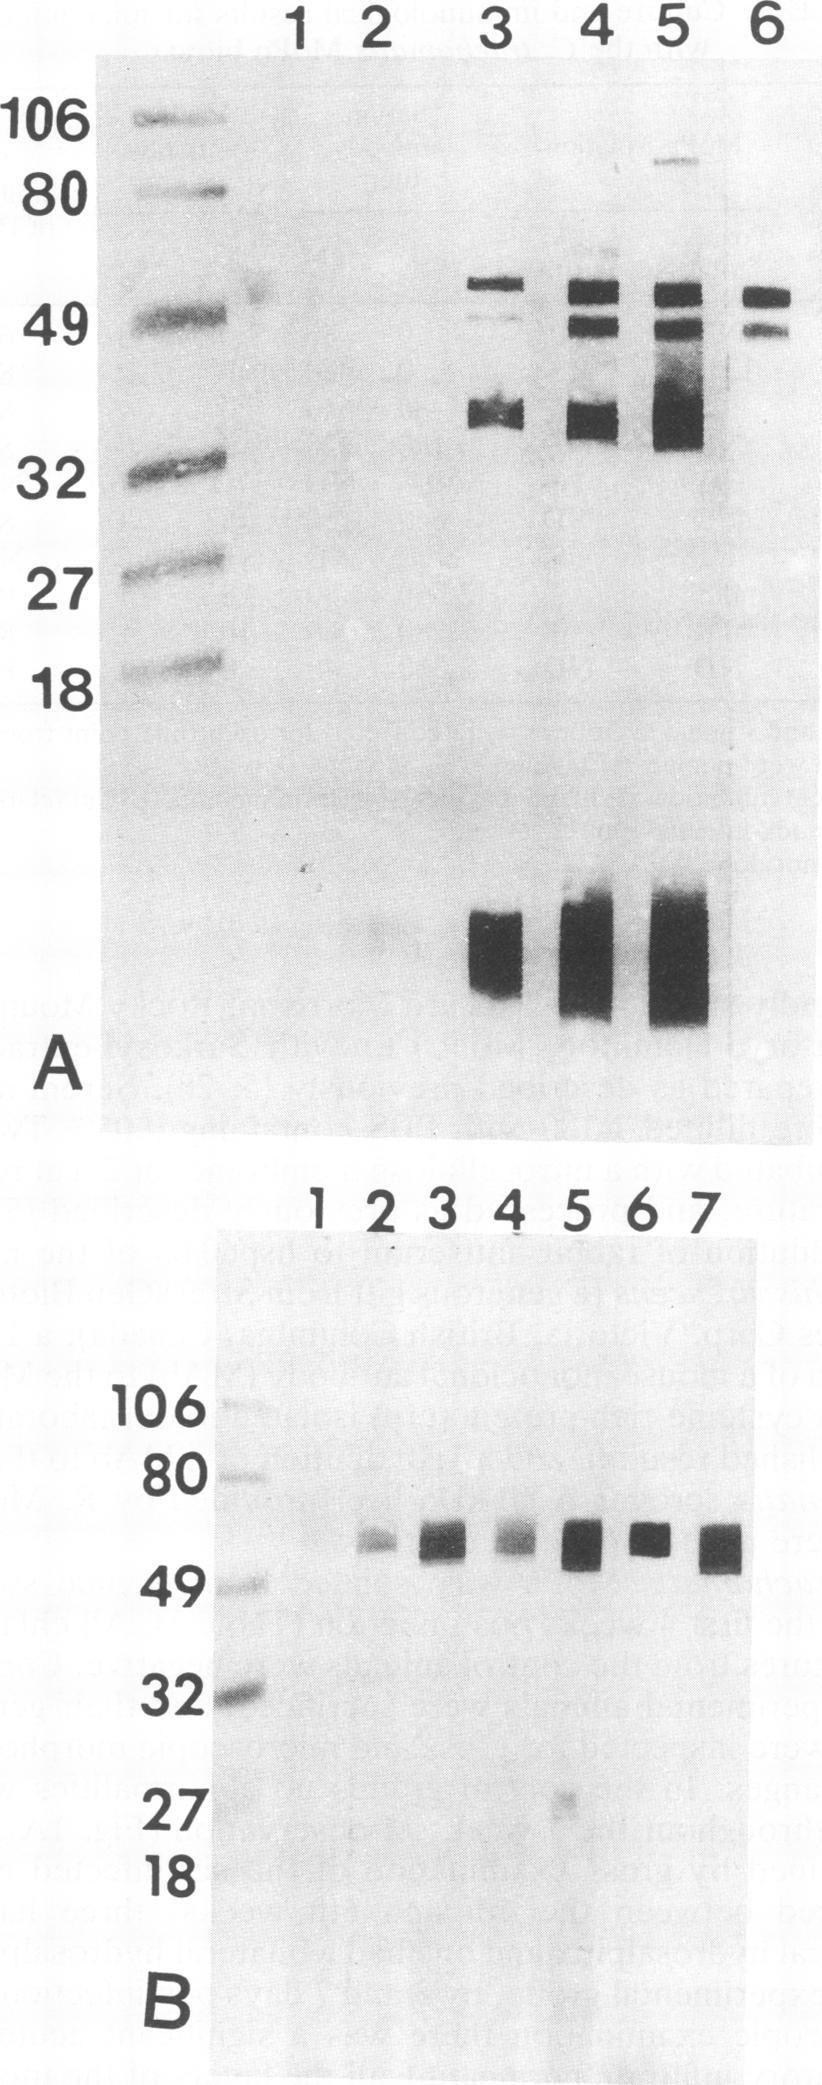 774 NOTES 80 * 32# 12 3 4 5 6 7 au a a as. WA Nspq 1 FIG. 2. Western blot analysis of the total Ig response in serum.